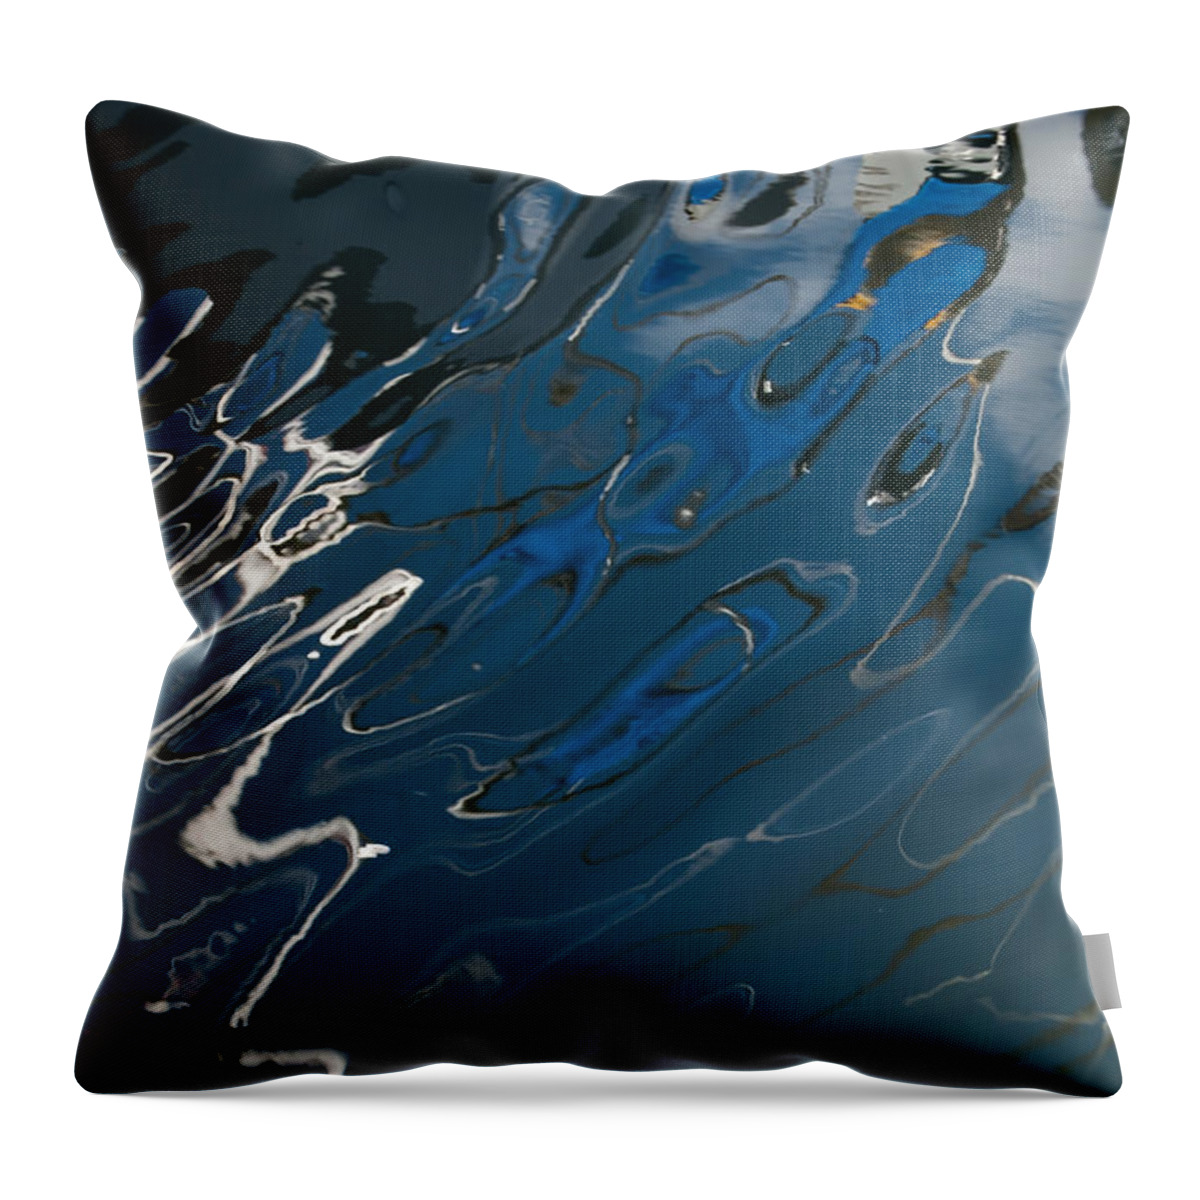 Abstract Throw Pillow featuring the photograph Abstract Reflection by Jani Freimann